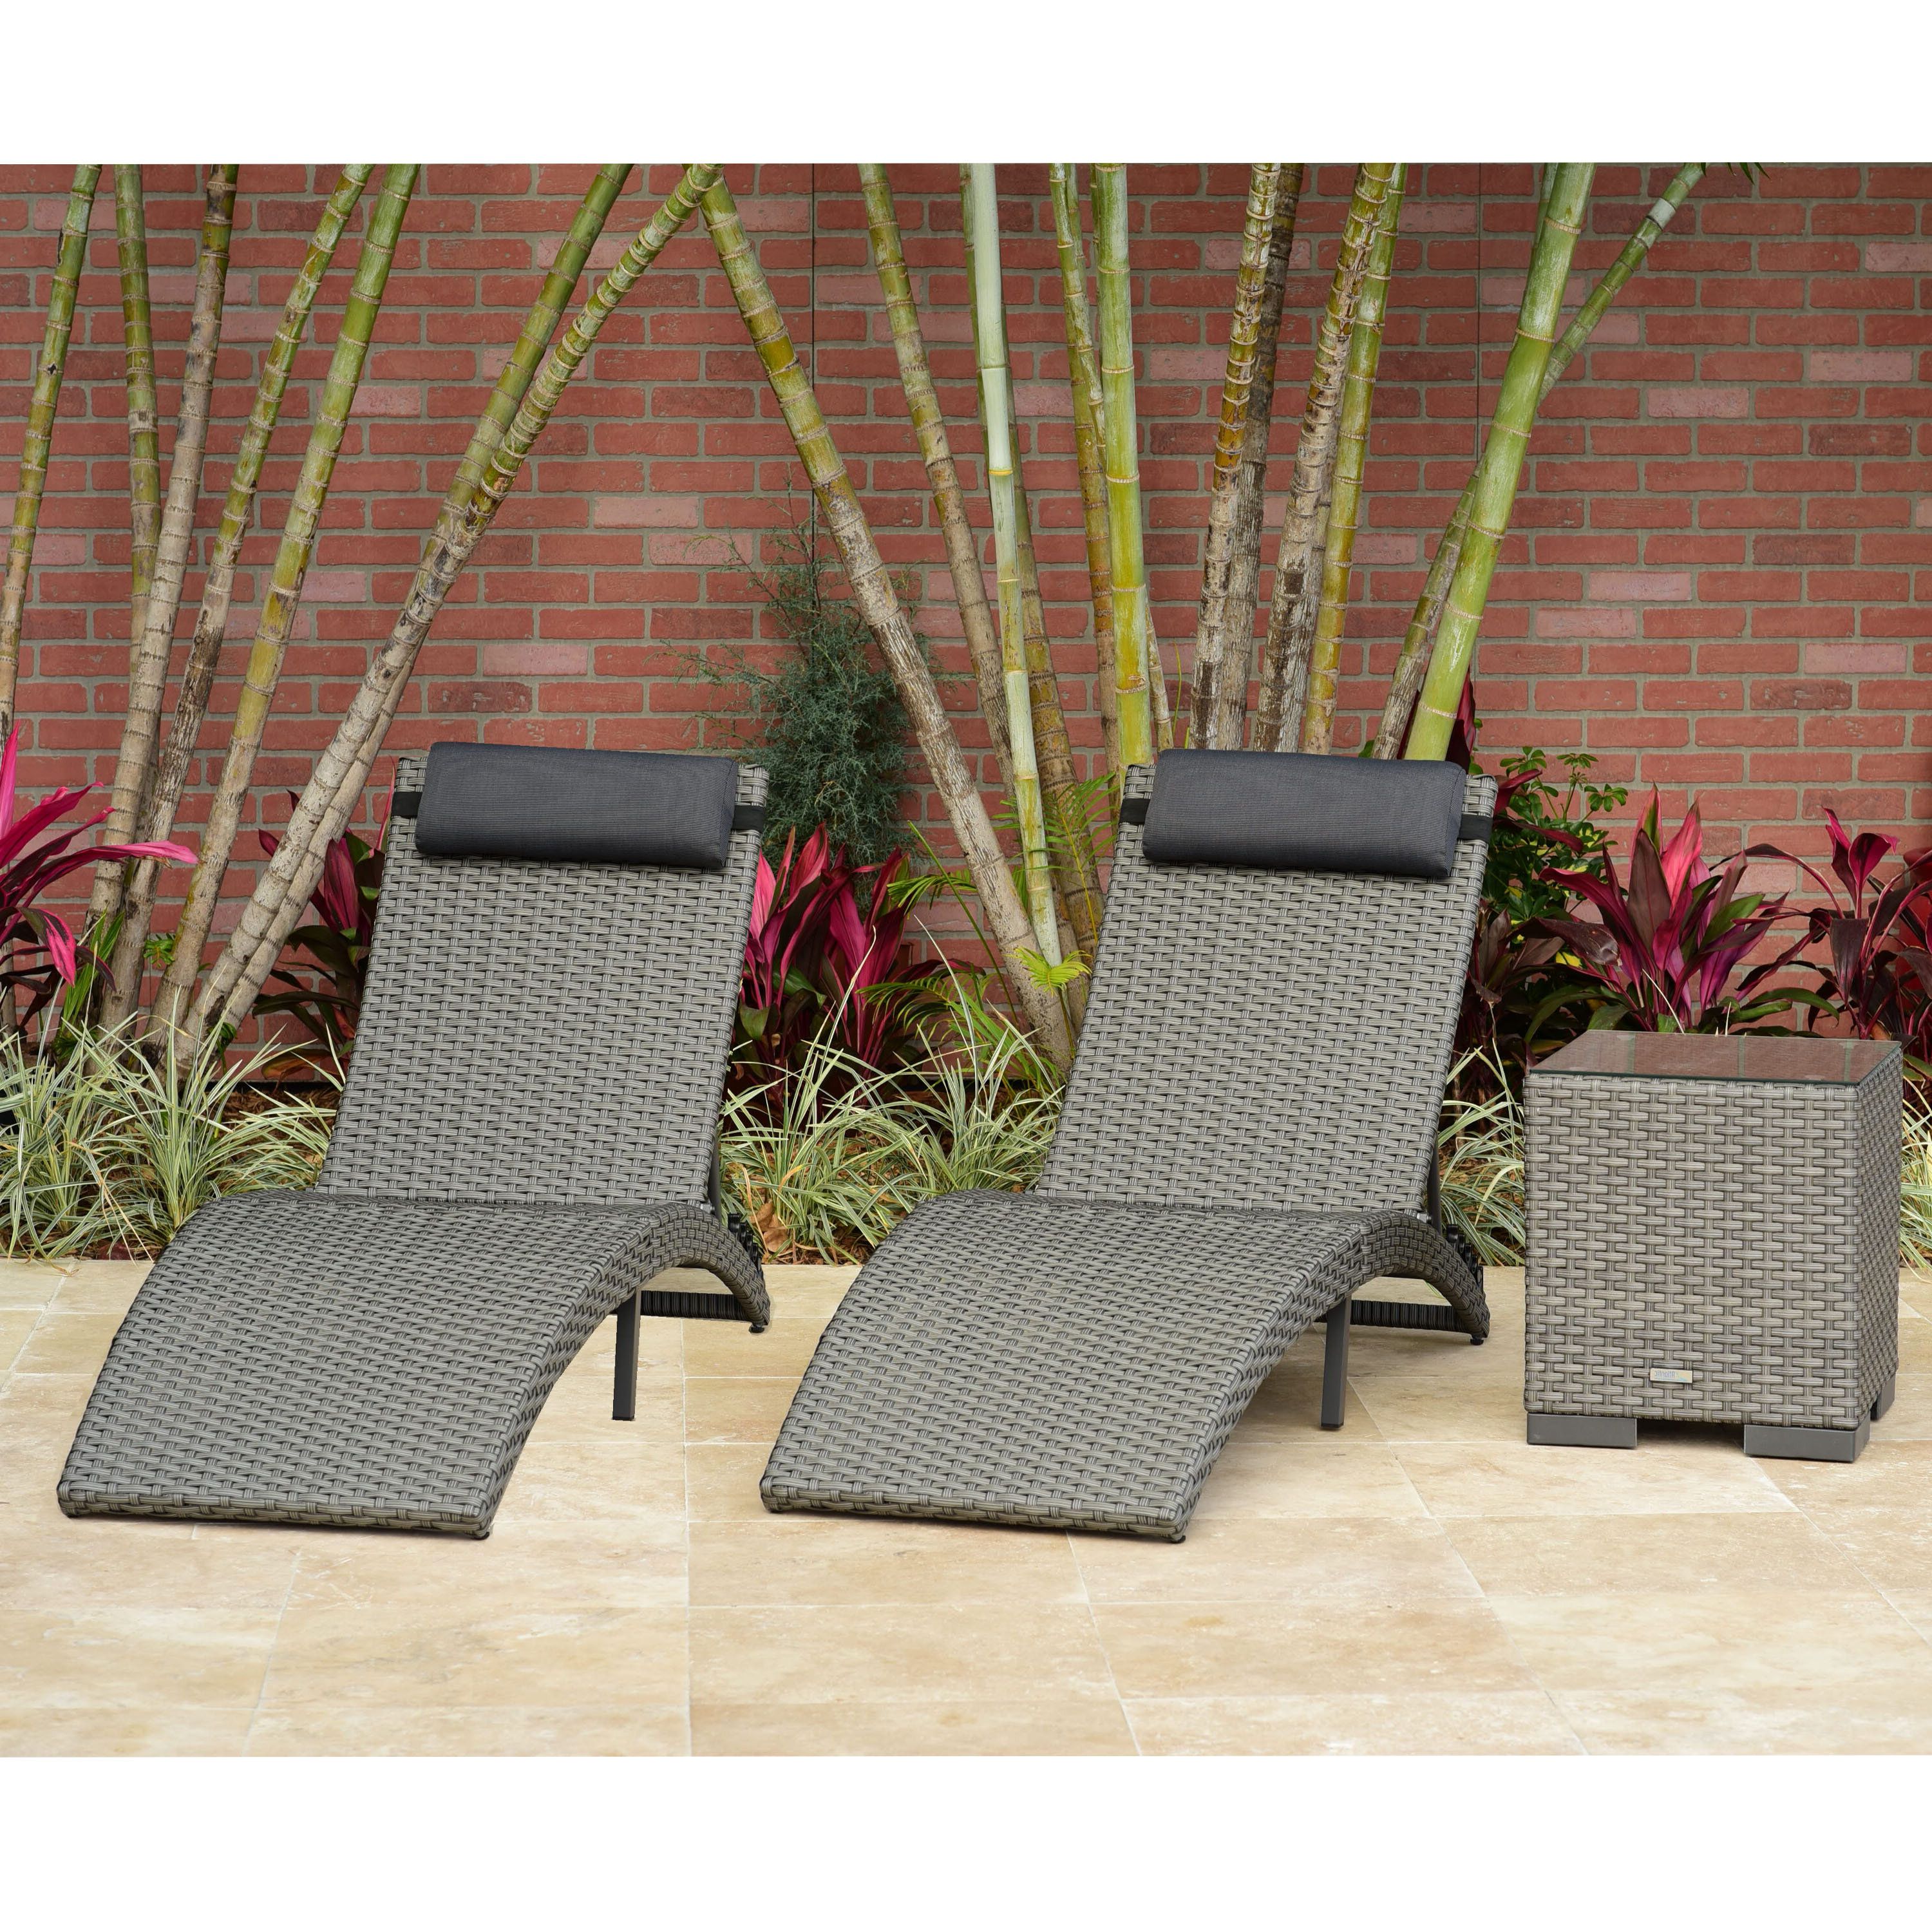 Latest Outdoor 3 Piece Chaise Lounger Sets With Table Within Sansom 3 Piece Chaise Lounge Set With Cushion And Table (View 12 of 25)